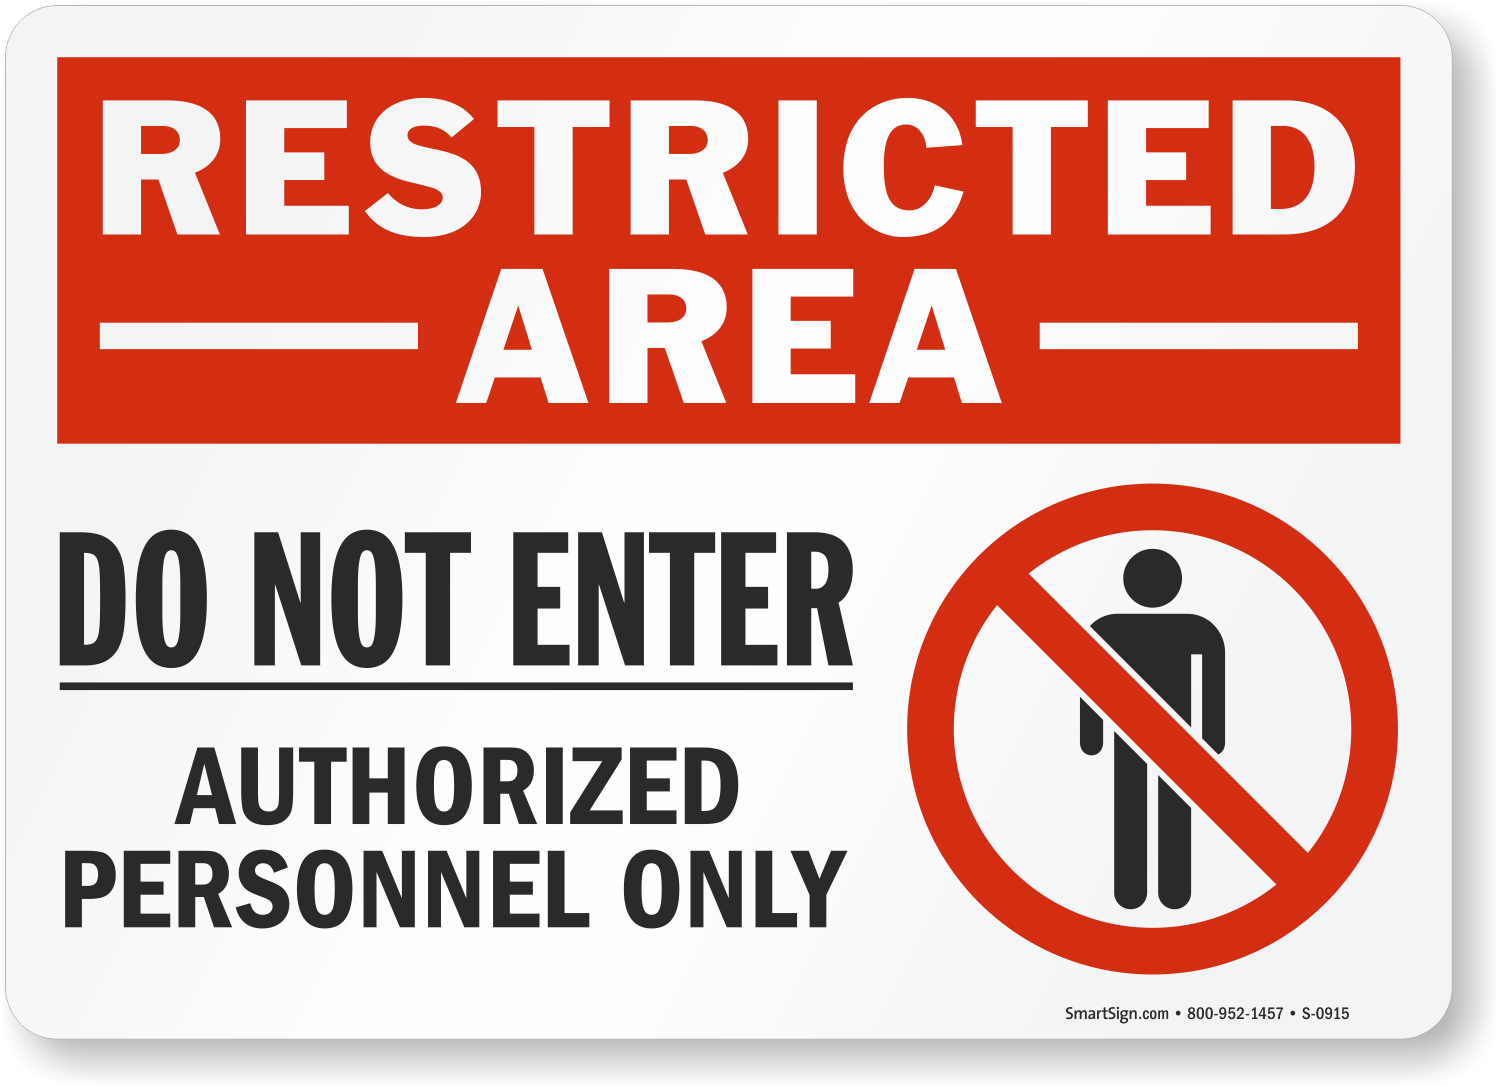 Dont only. Restricted area sign. Authorized personnel only. Предупреждение restricted. Do not enter authorized personnel only.